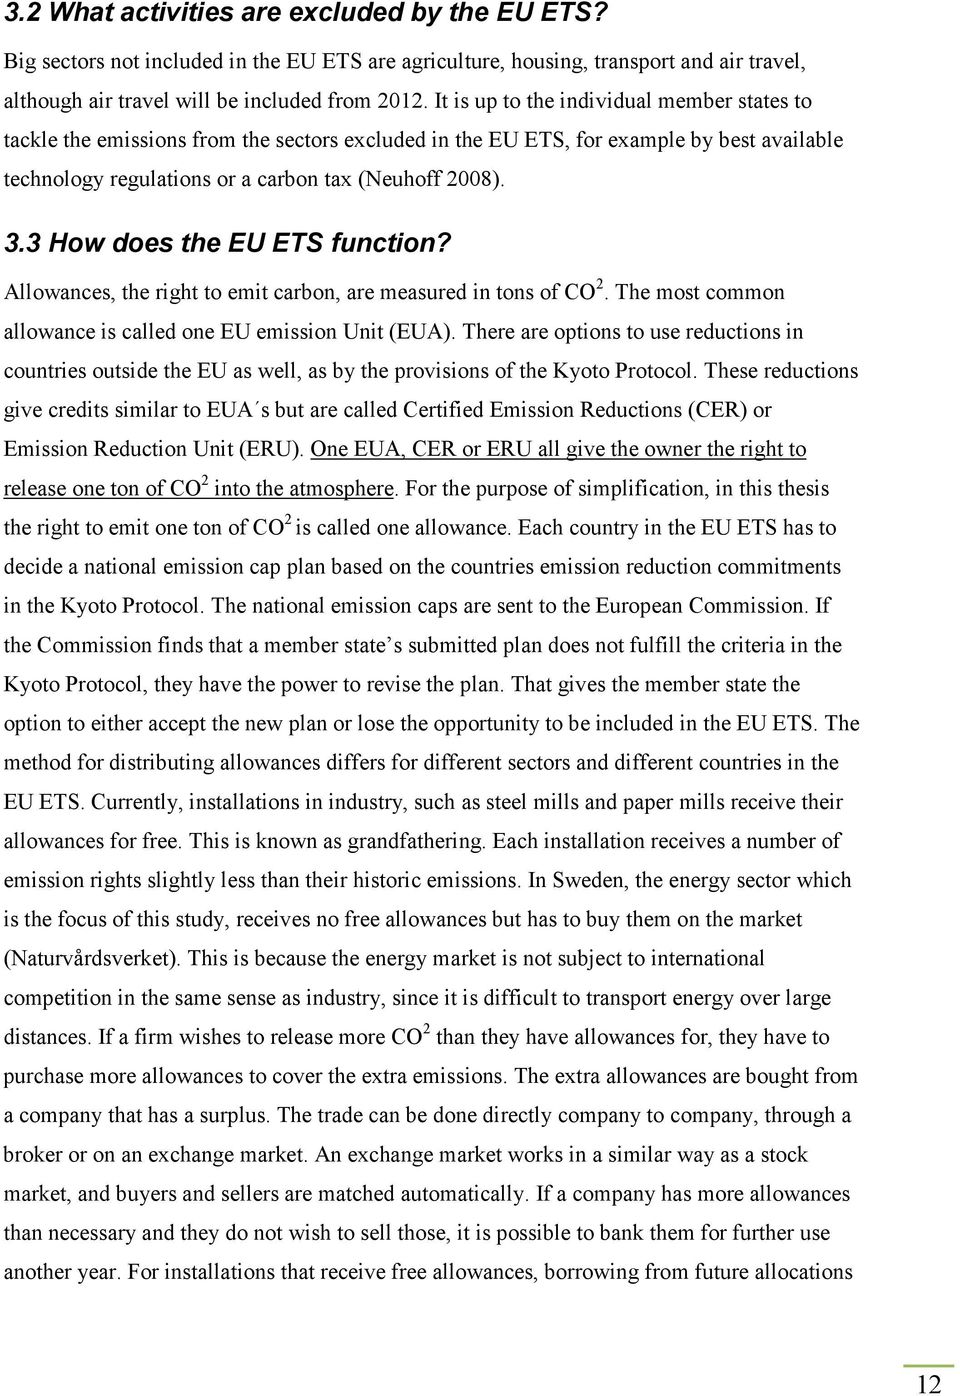 3 How does the EU ETS function? Allowances, the right to emit carbon, are measured in tons of CO 2. The most common allowance is called one EU emission Unit (EUA).